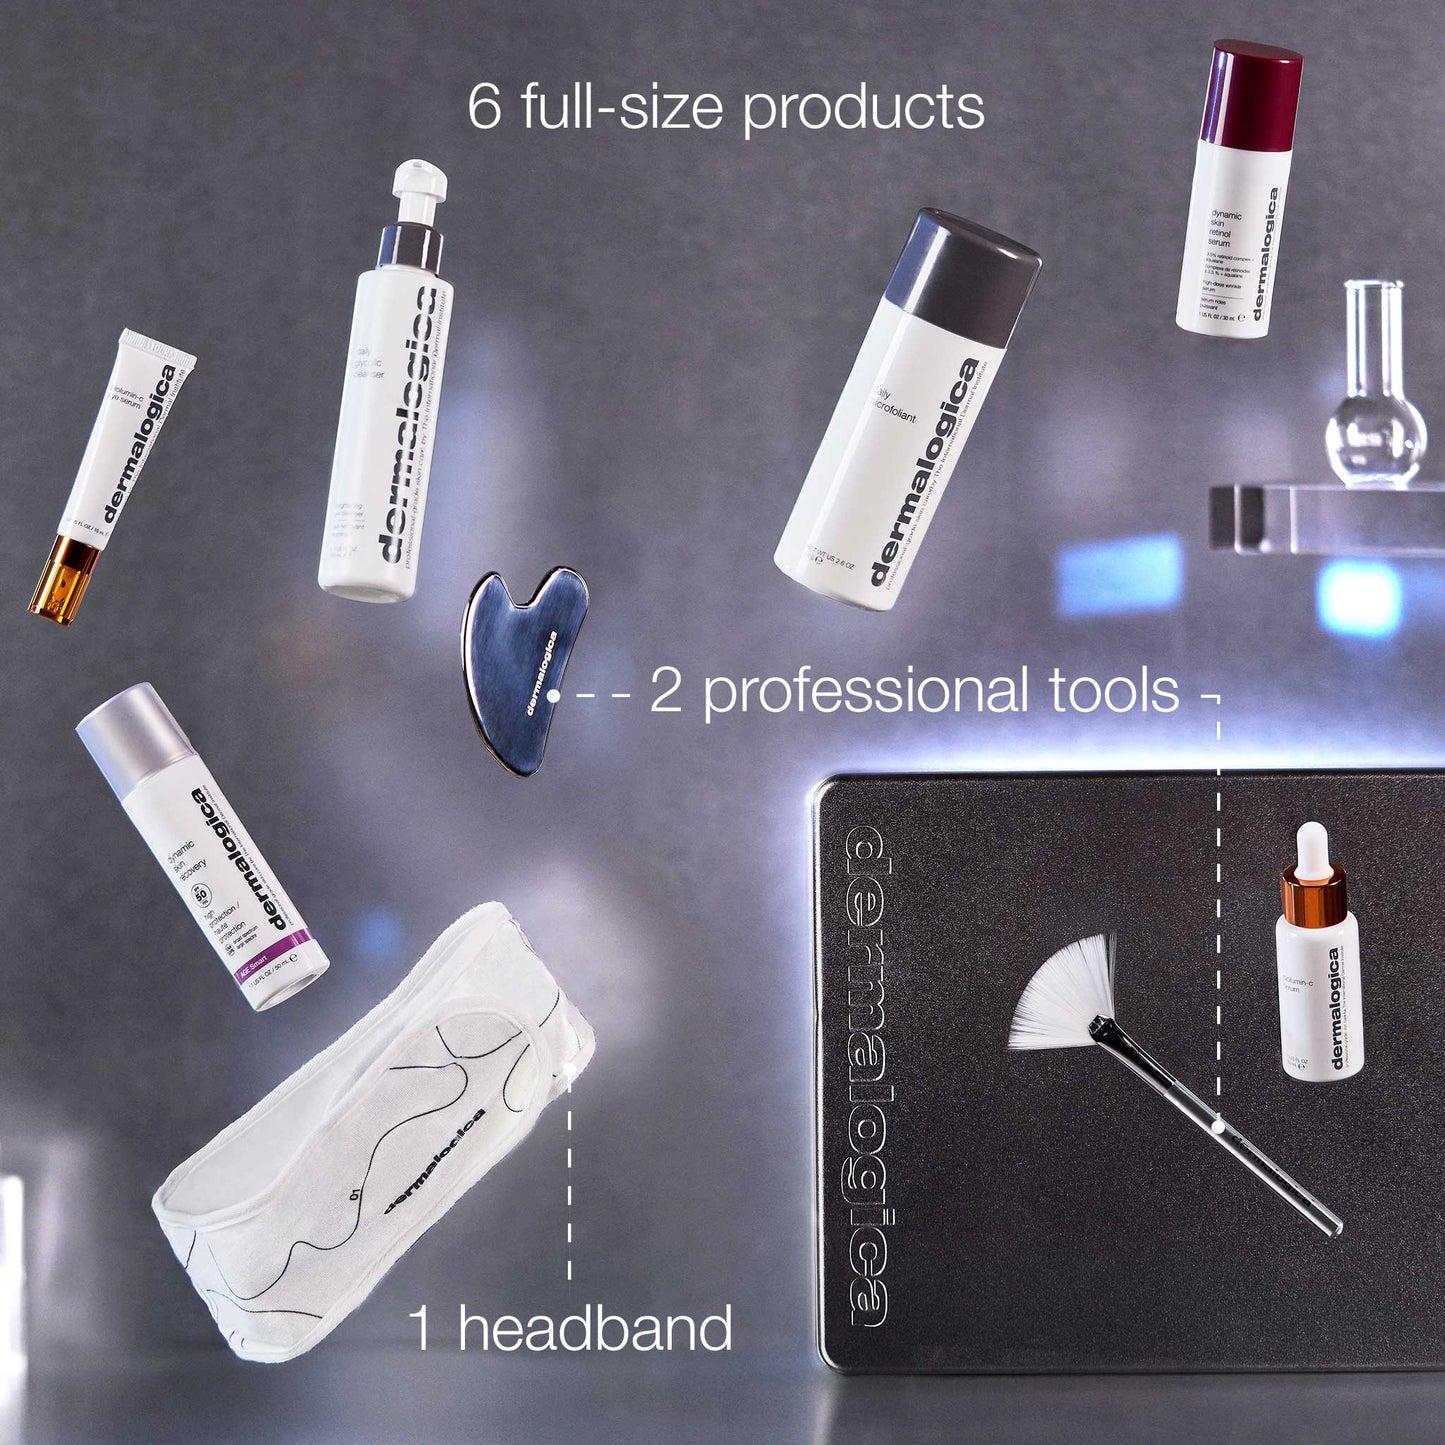 image of the products, profressional tools and headband in the kit